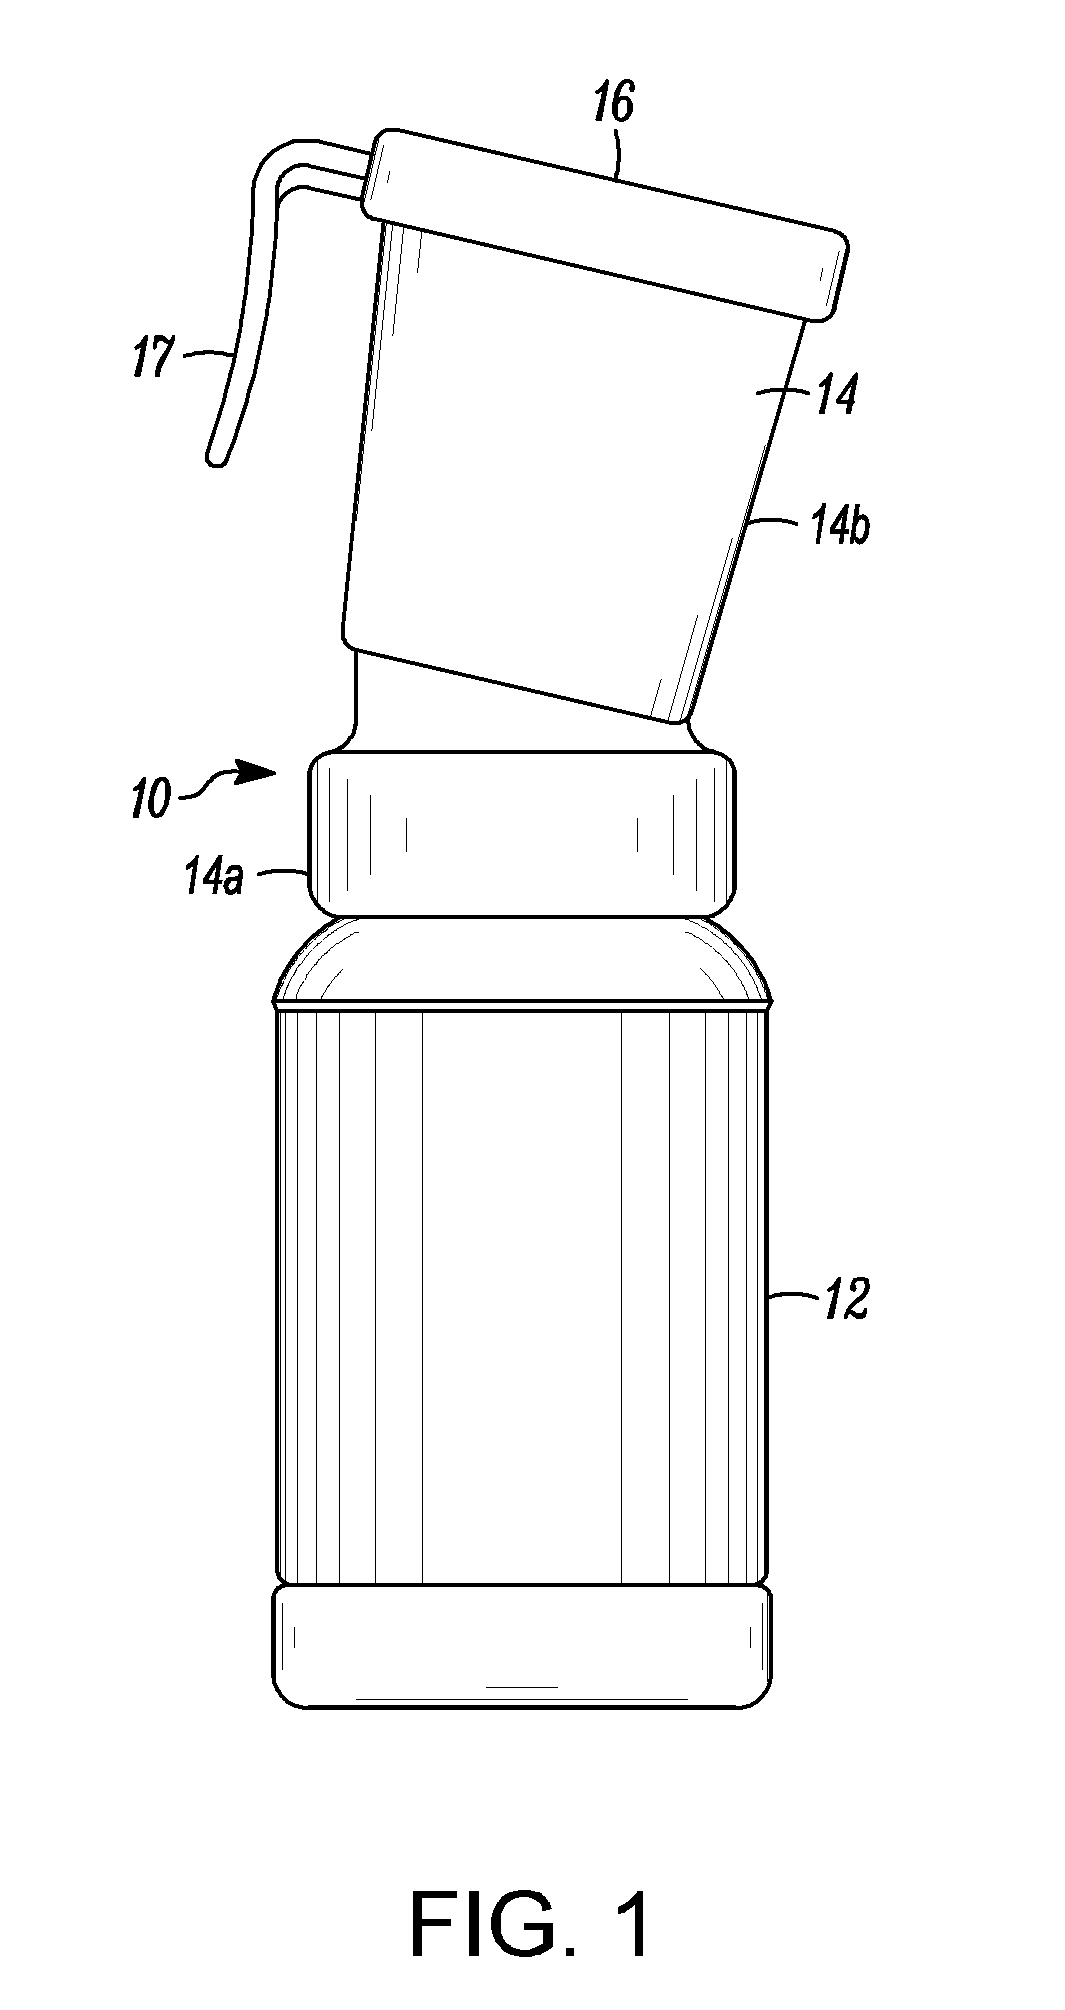 Teat application device with cup portion having limited circumferential extension